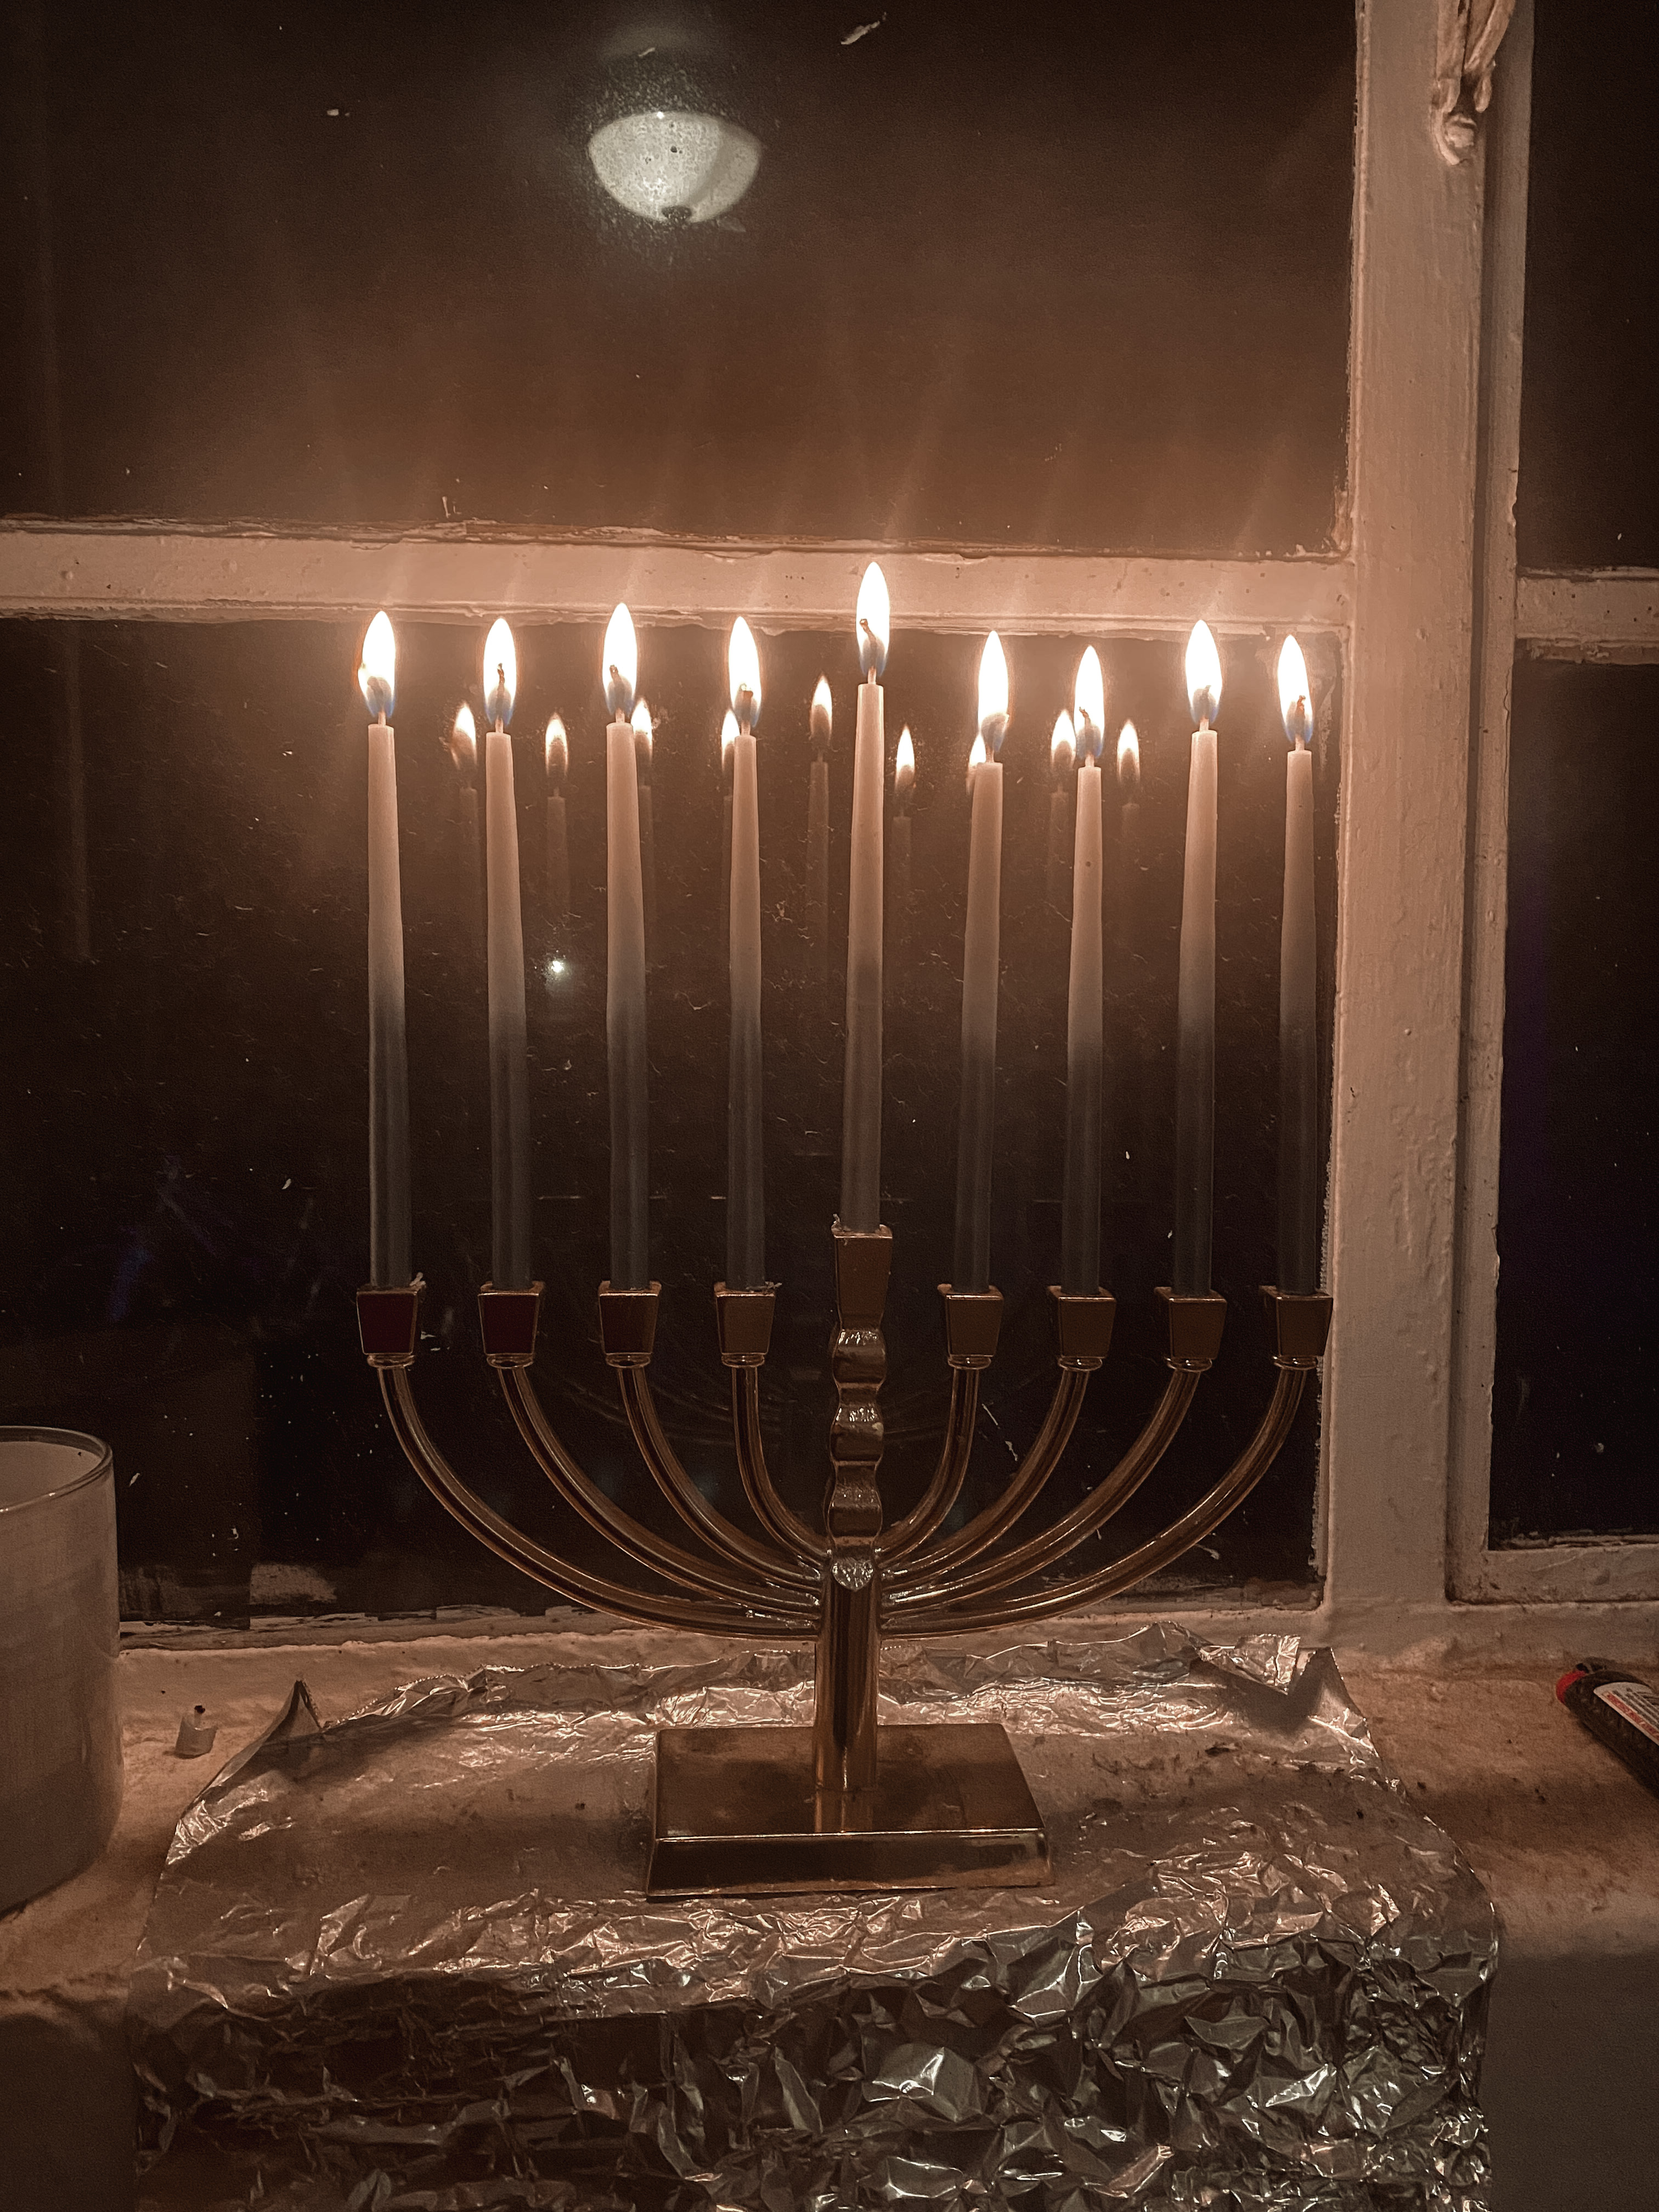 picture of a hanukkah menora with 9 candles in front of a window